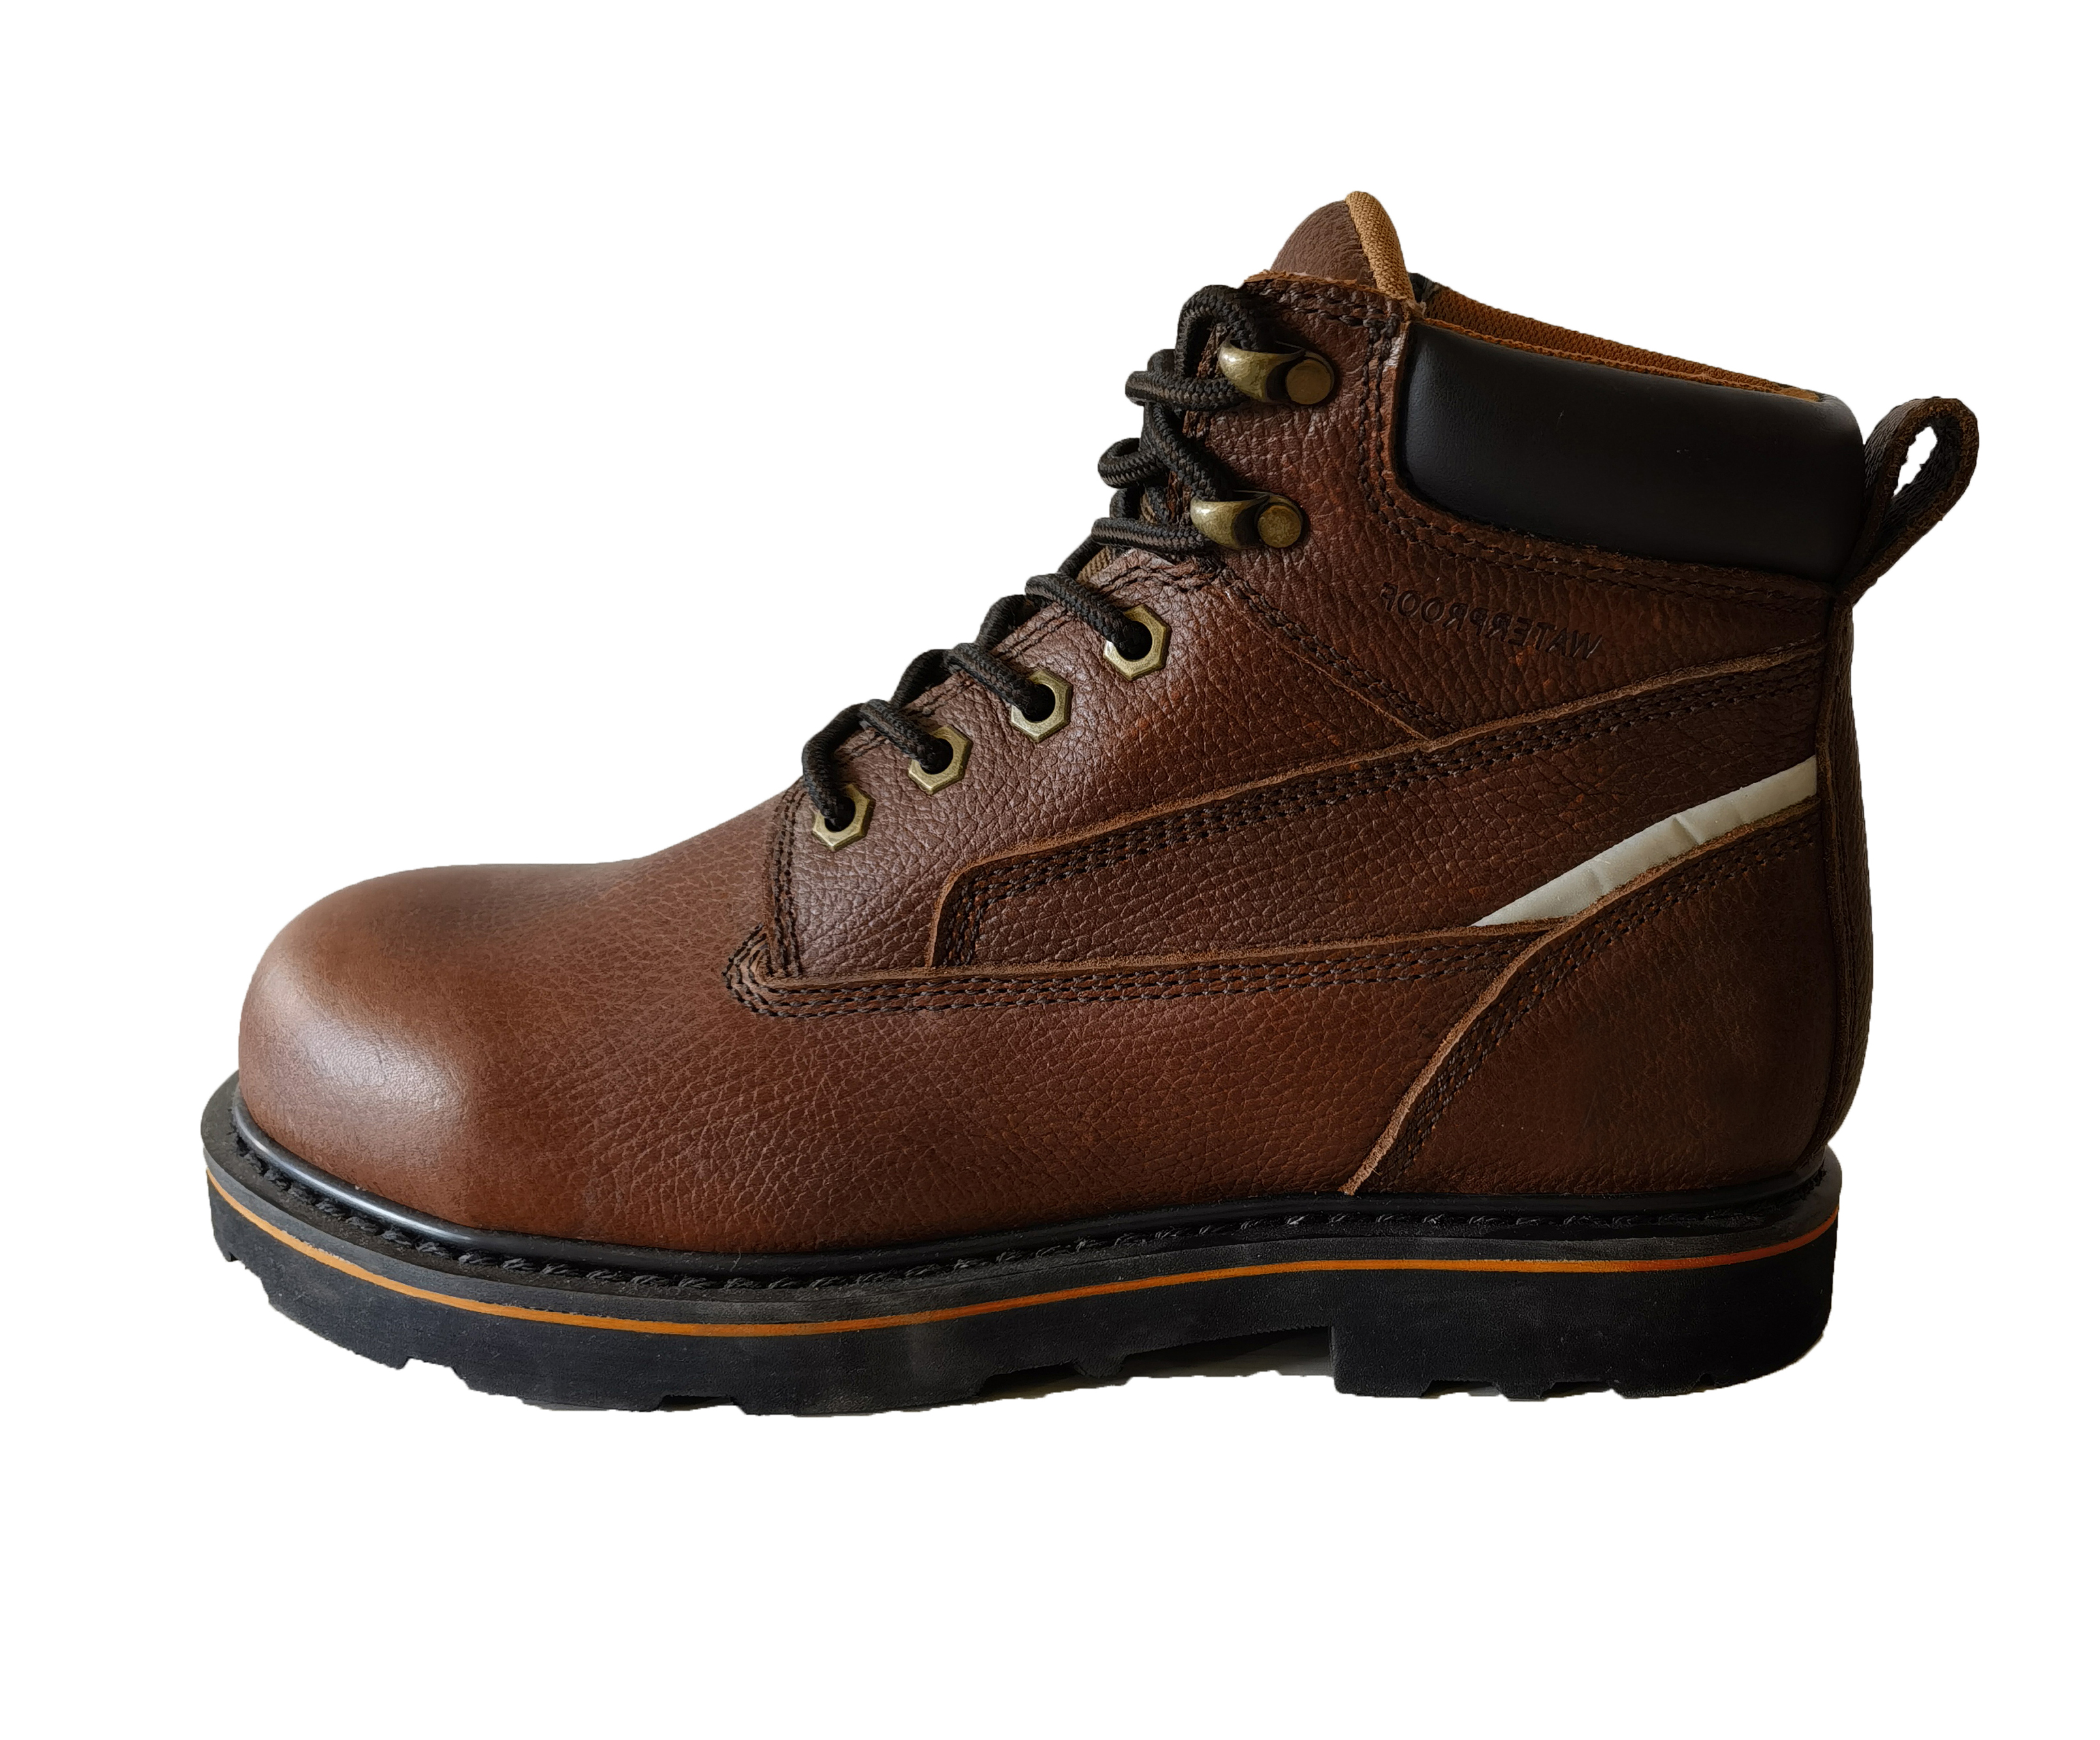 Winter Work Boots for CSA Compliance: Stay Warm and Safe on the Job!